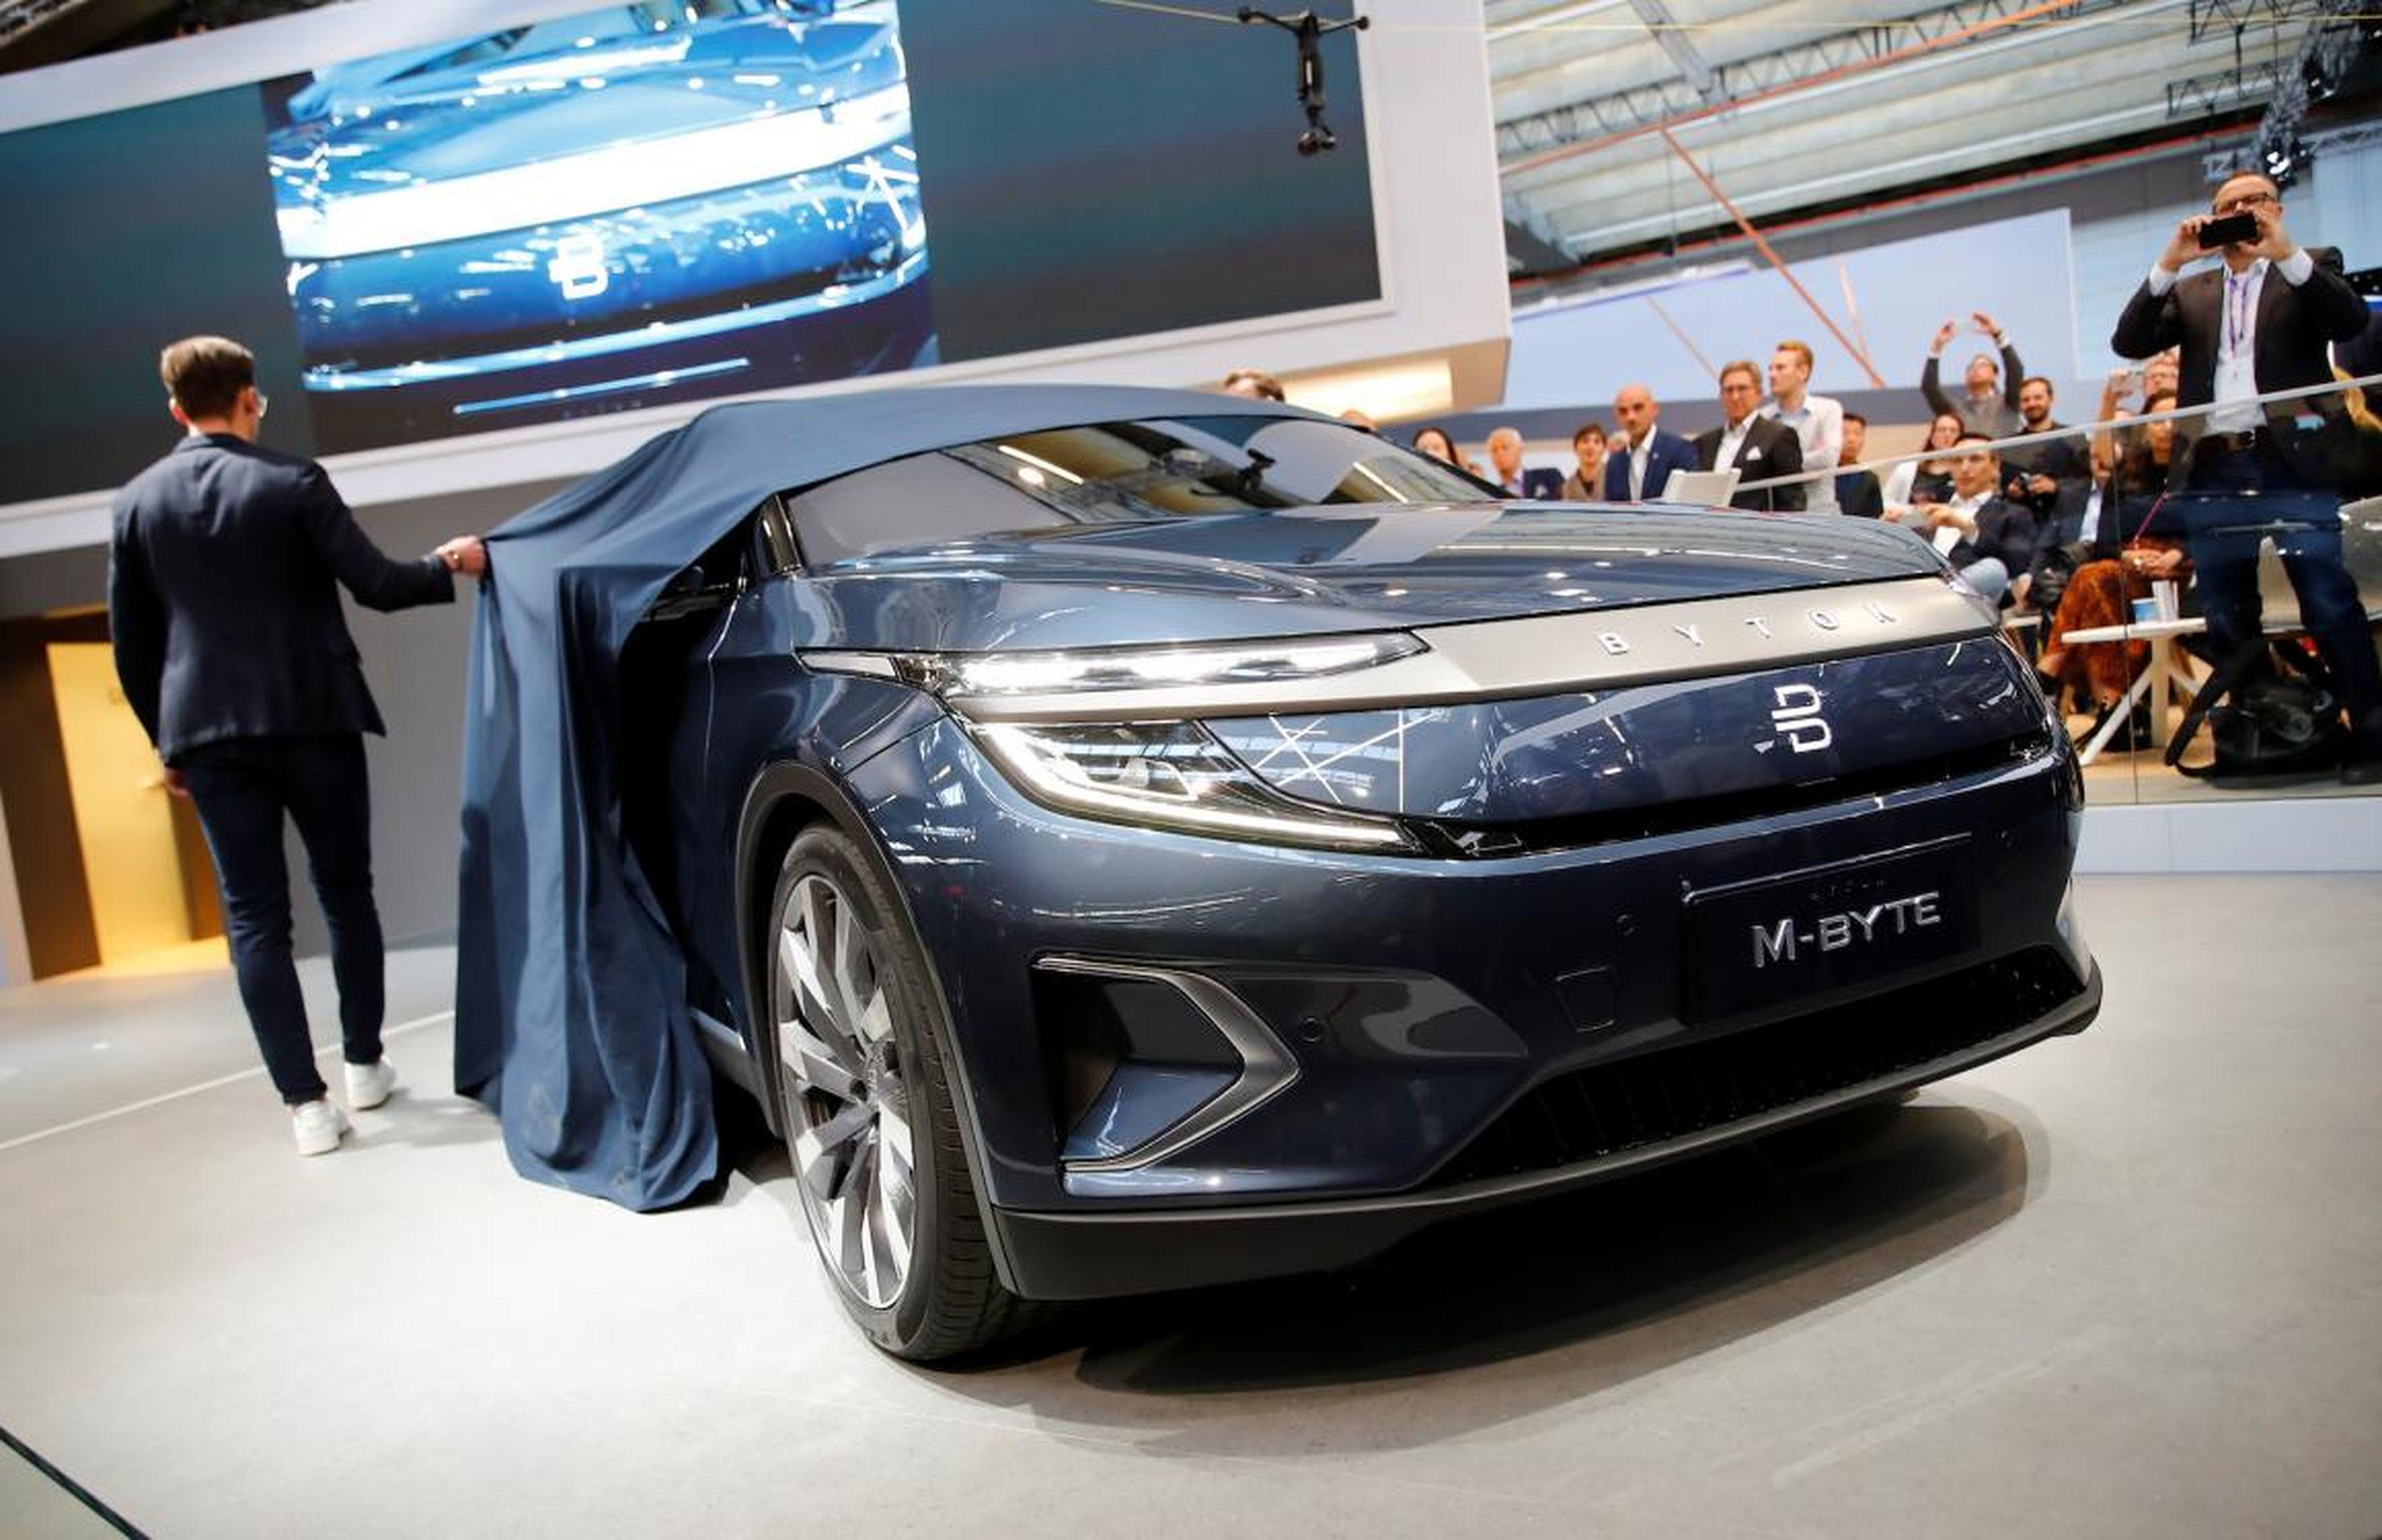 China's Byton showed its M-Byte Concept, yet another all-electric future contender.